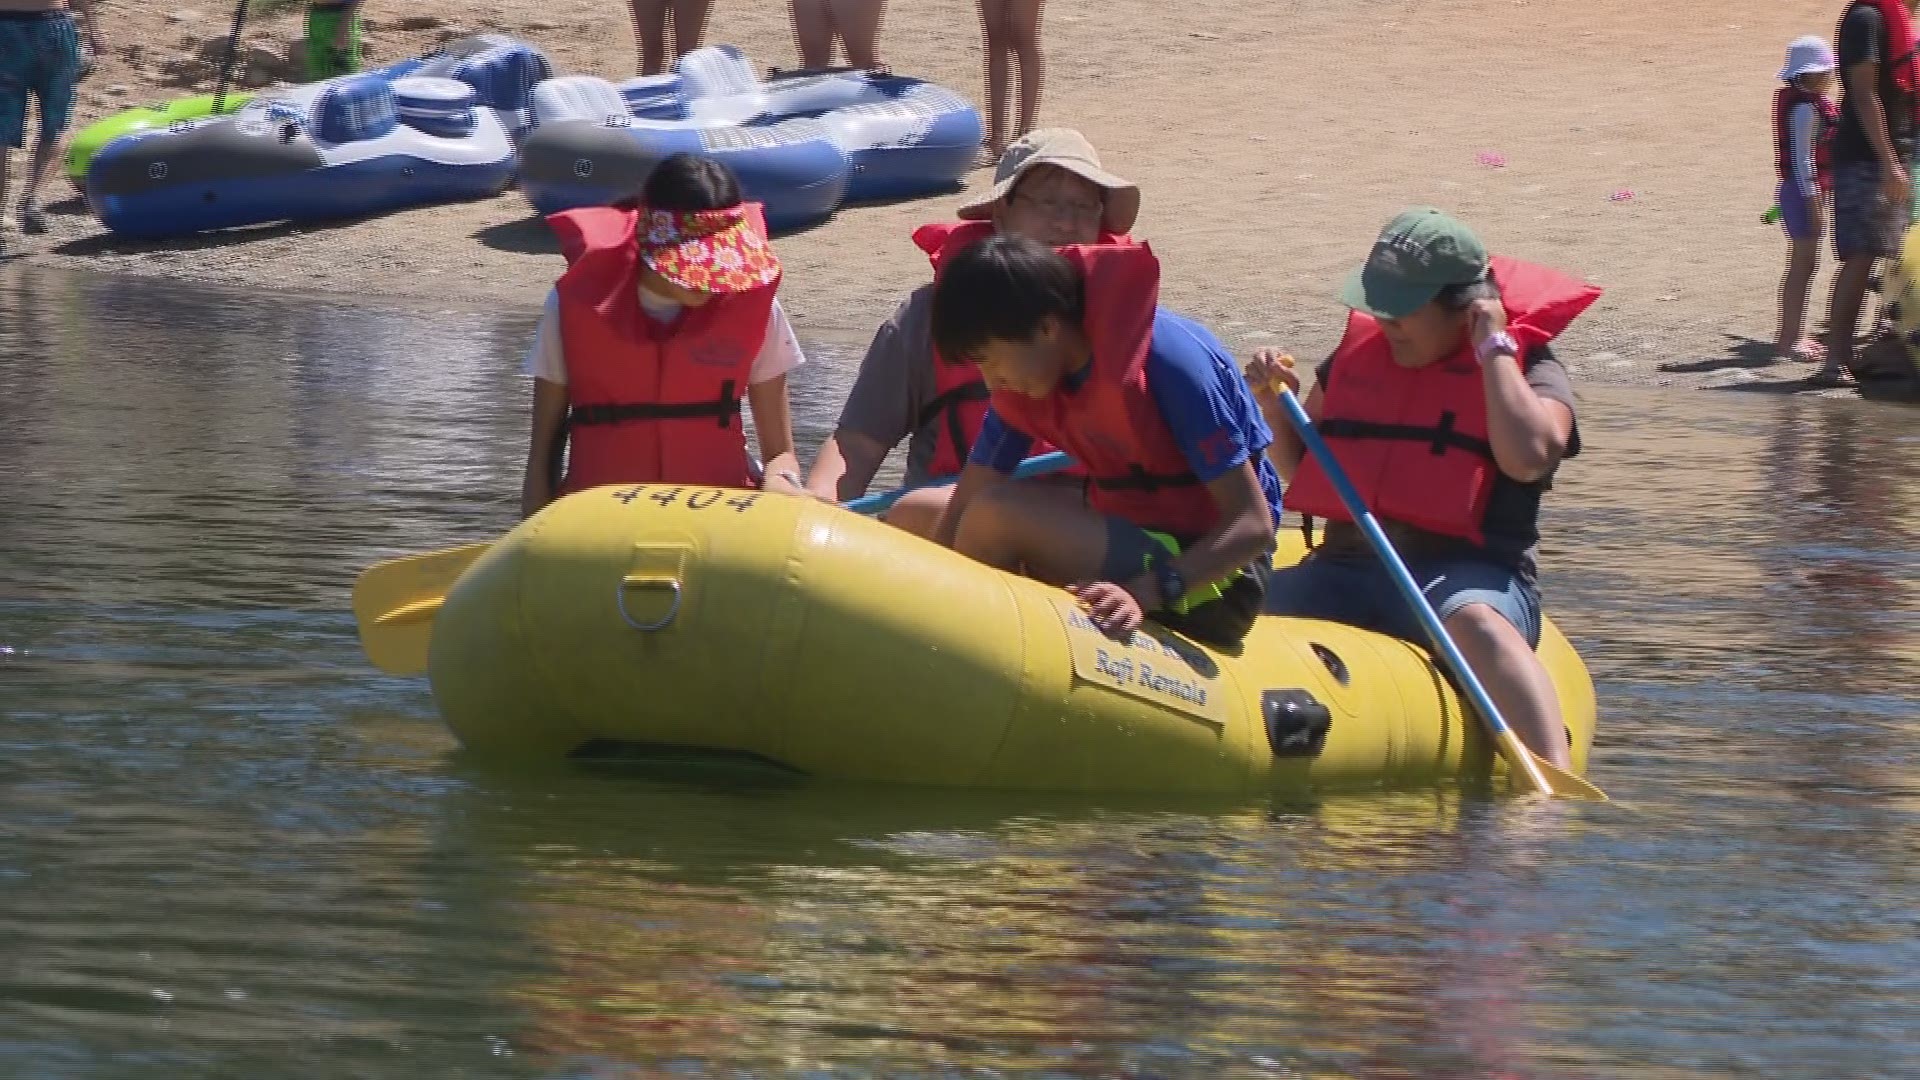 It can be tempting to take a brightly colored pool float out on the river, but experts say that could be a deadly decision. ABC10's Carley Gomez⁠ tested one out with the team to learn why.